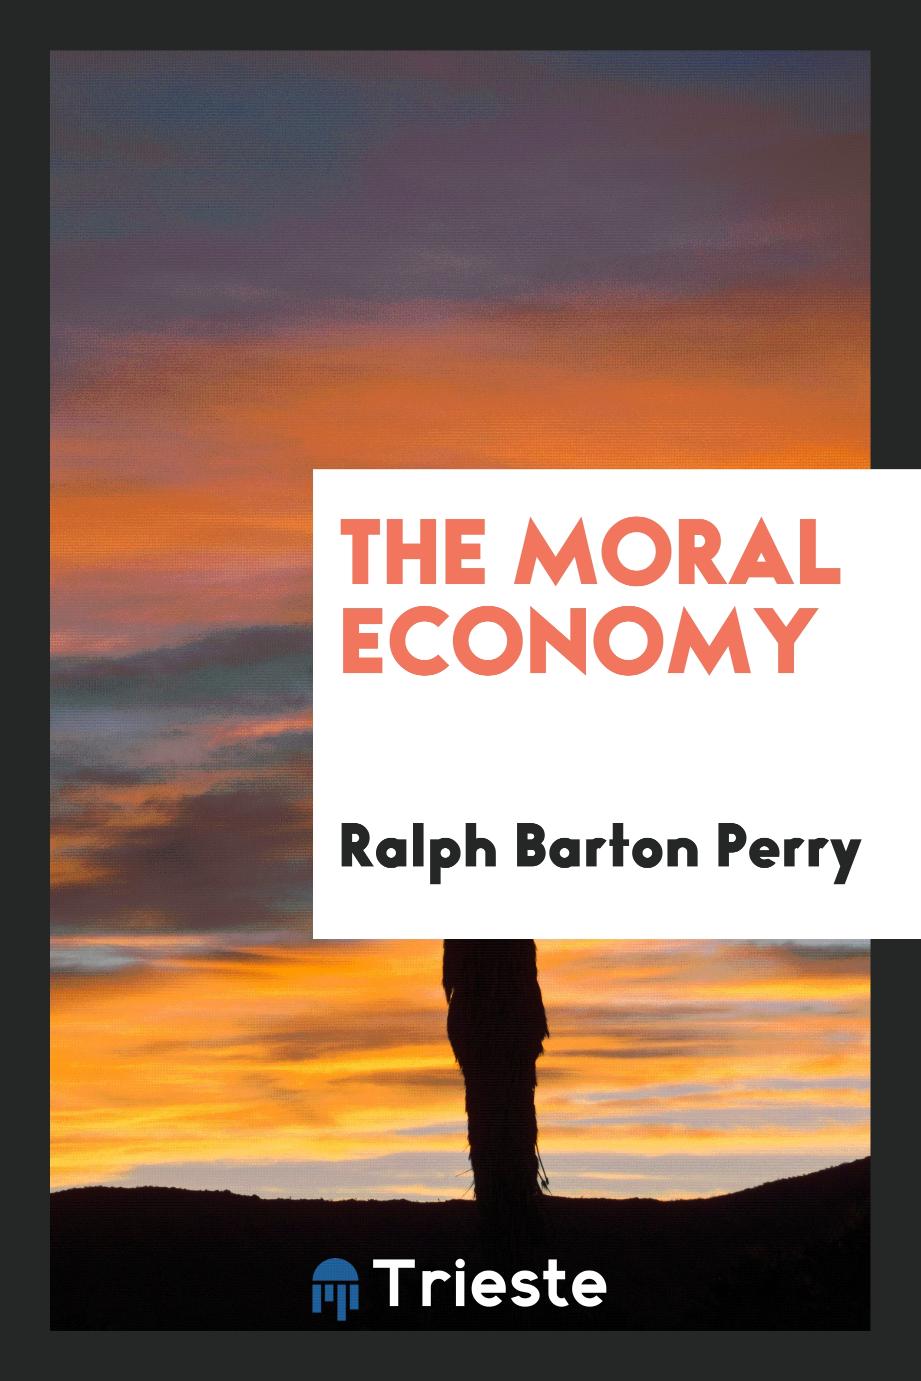 The moral economy